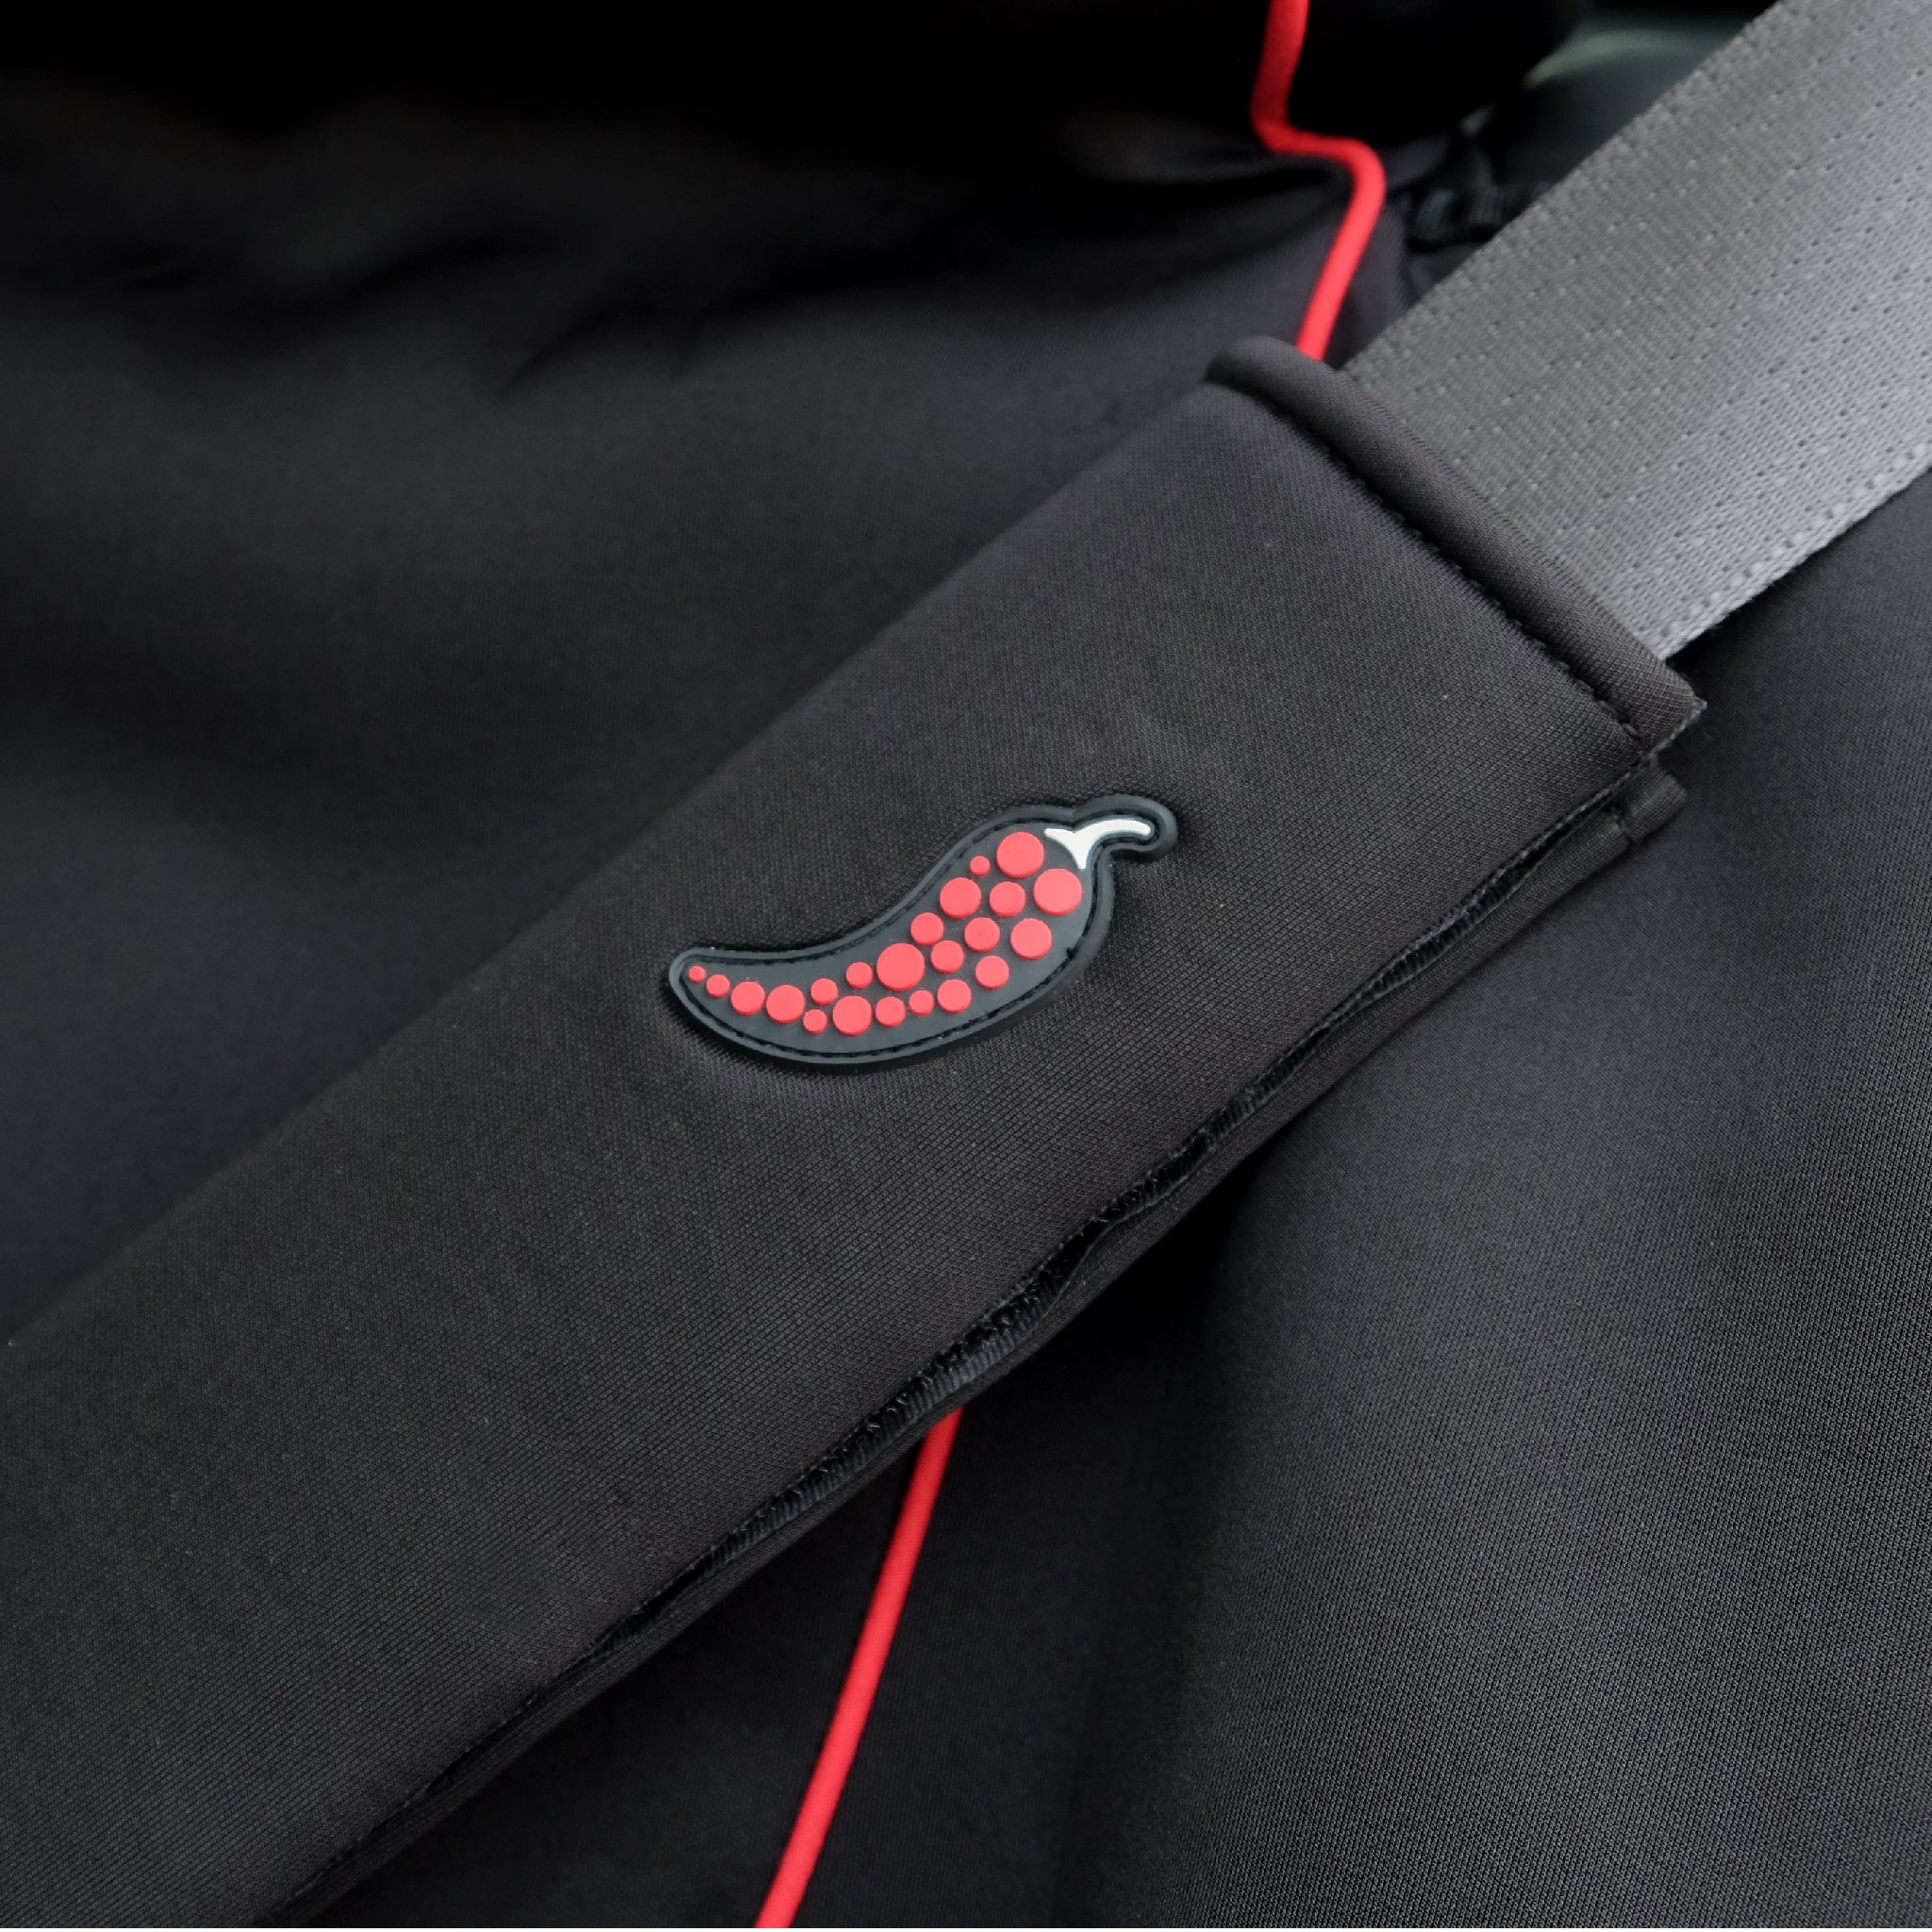 seat belt cover - Dry Rub Spice Wrap - Red Chili